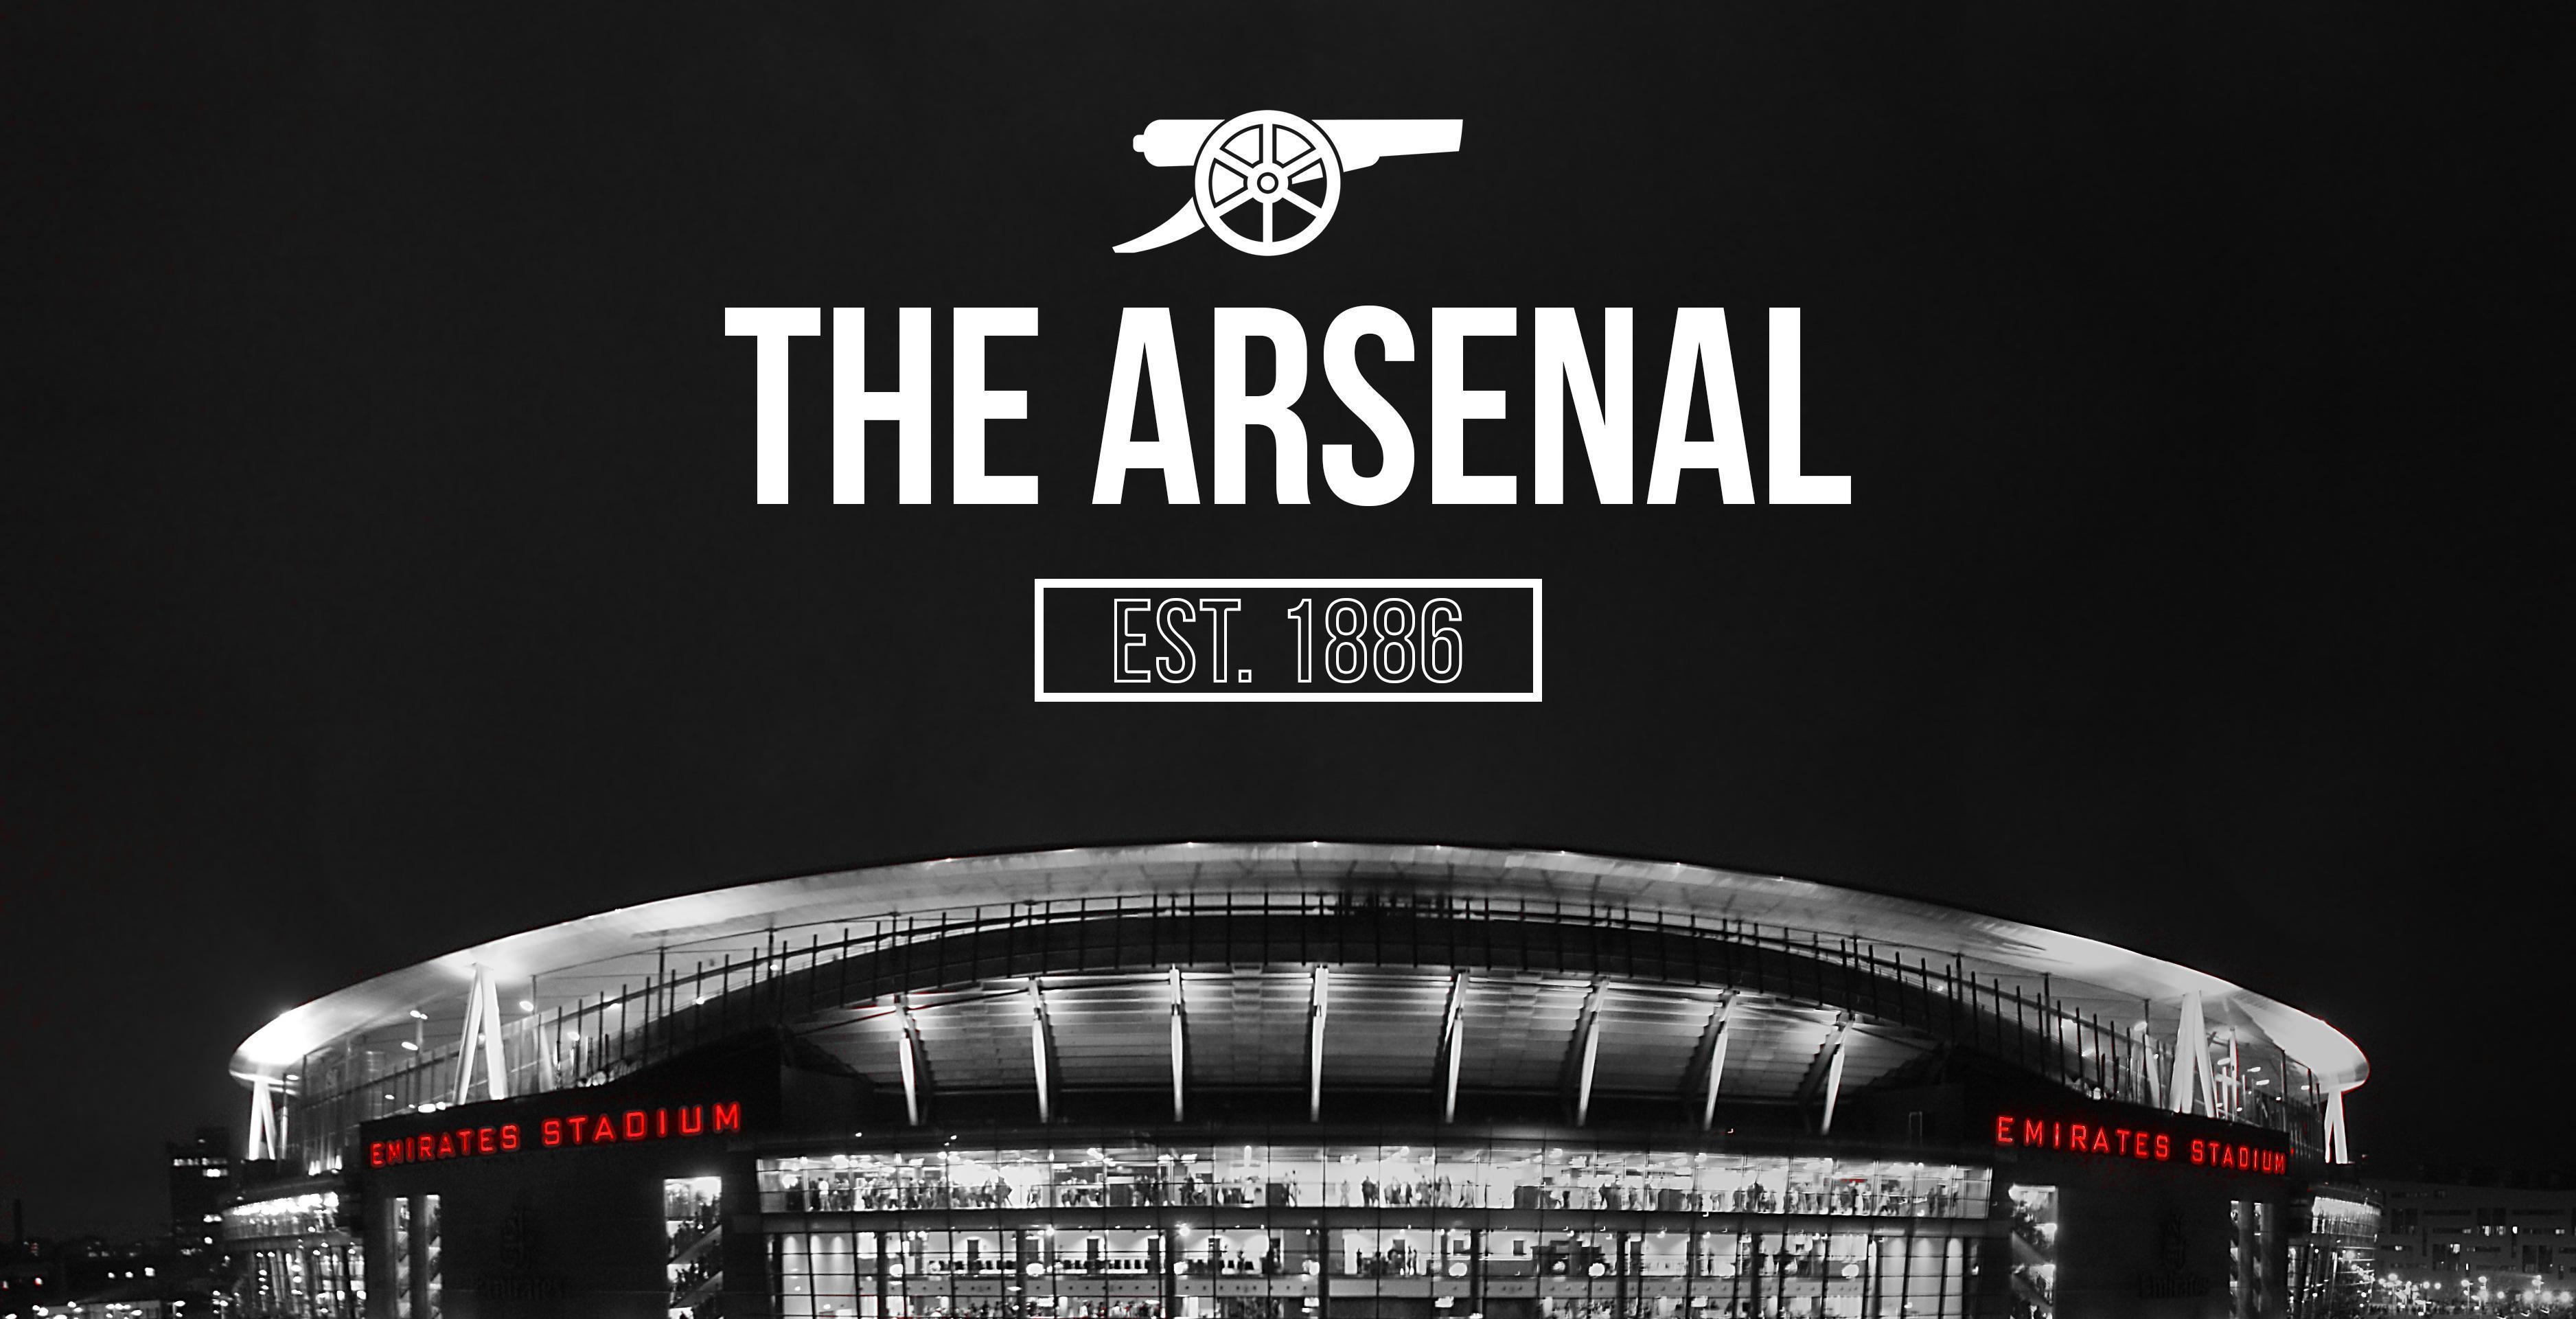 Made an Arsenal wallpaper. (Sorry for funny resolution)